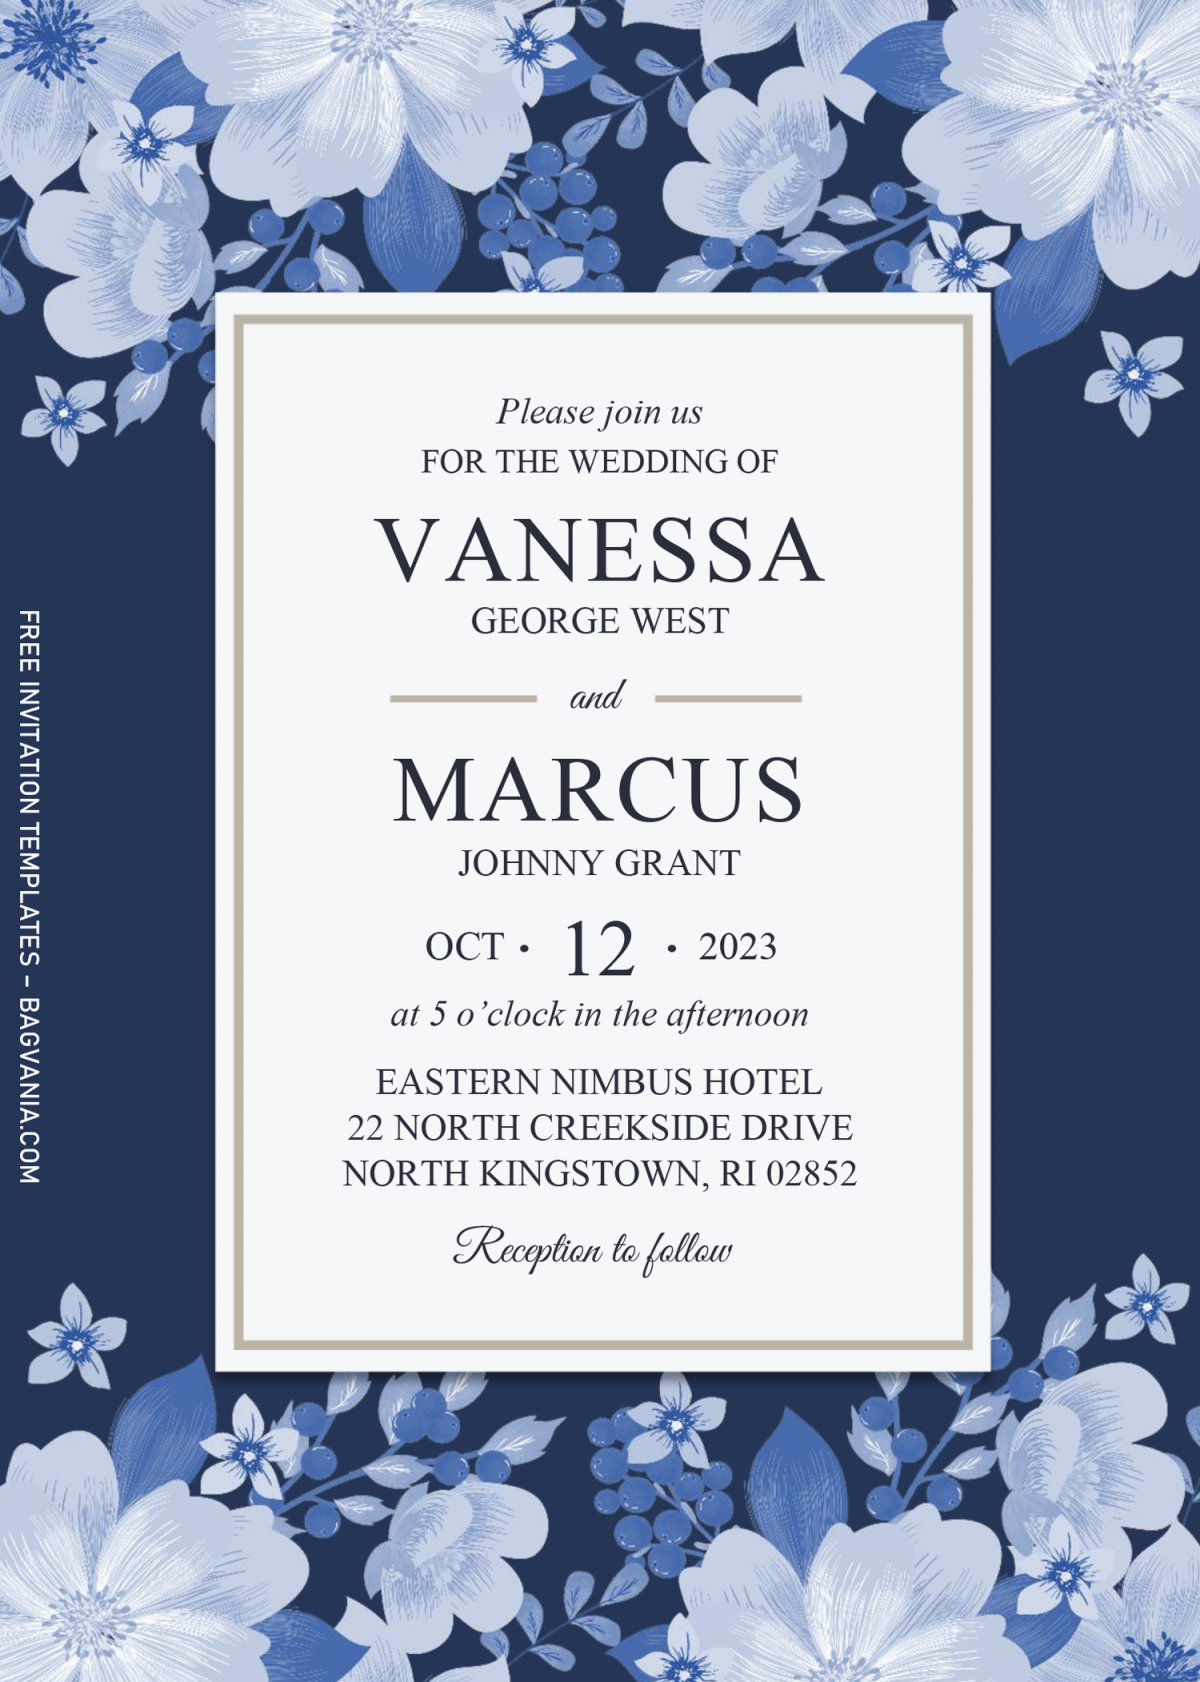 Modern Navy Invitation Templates - Editable With Microsoft Word and has blue floral design